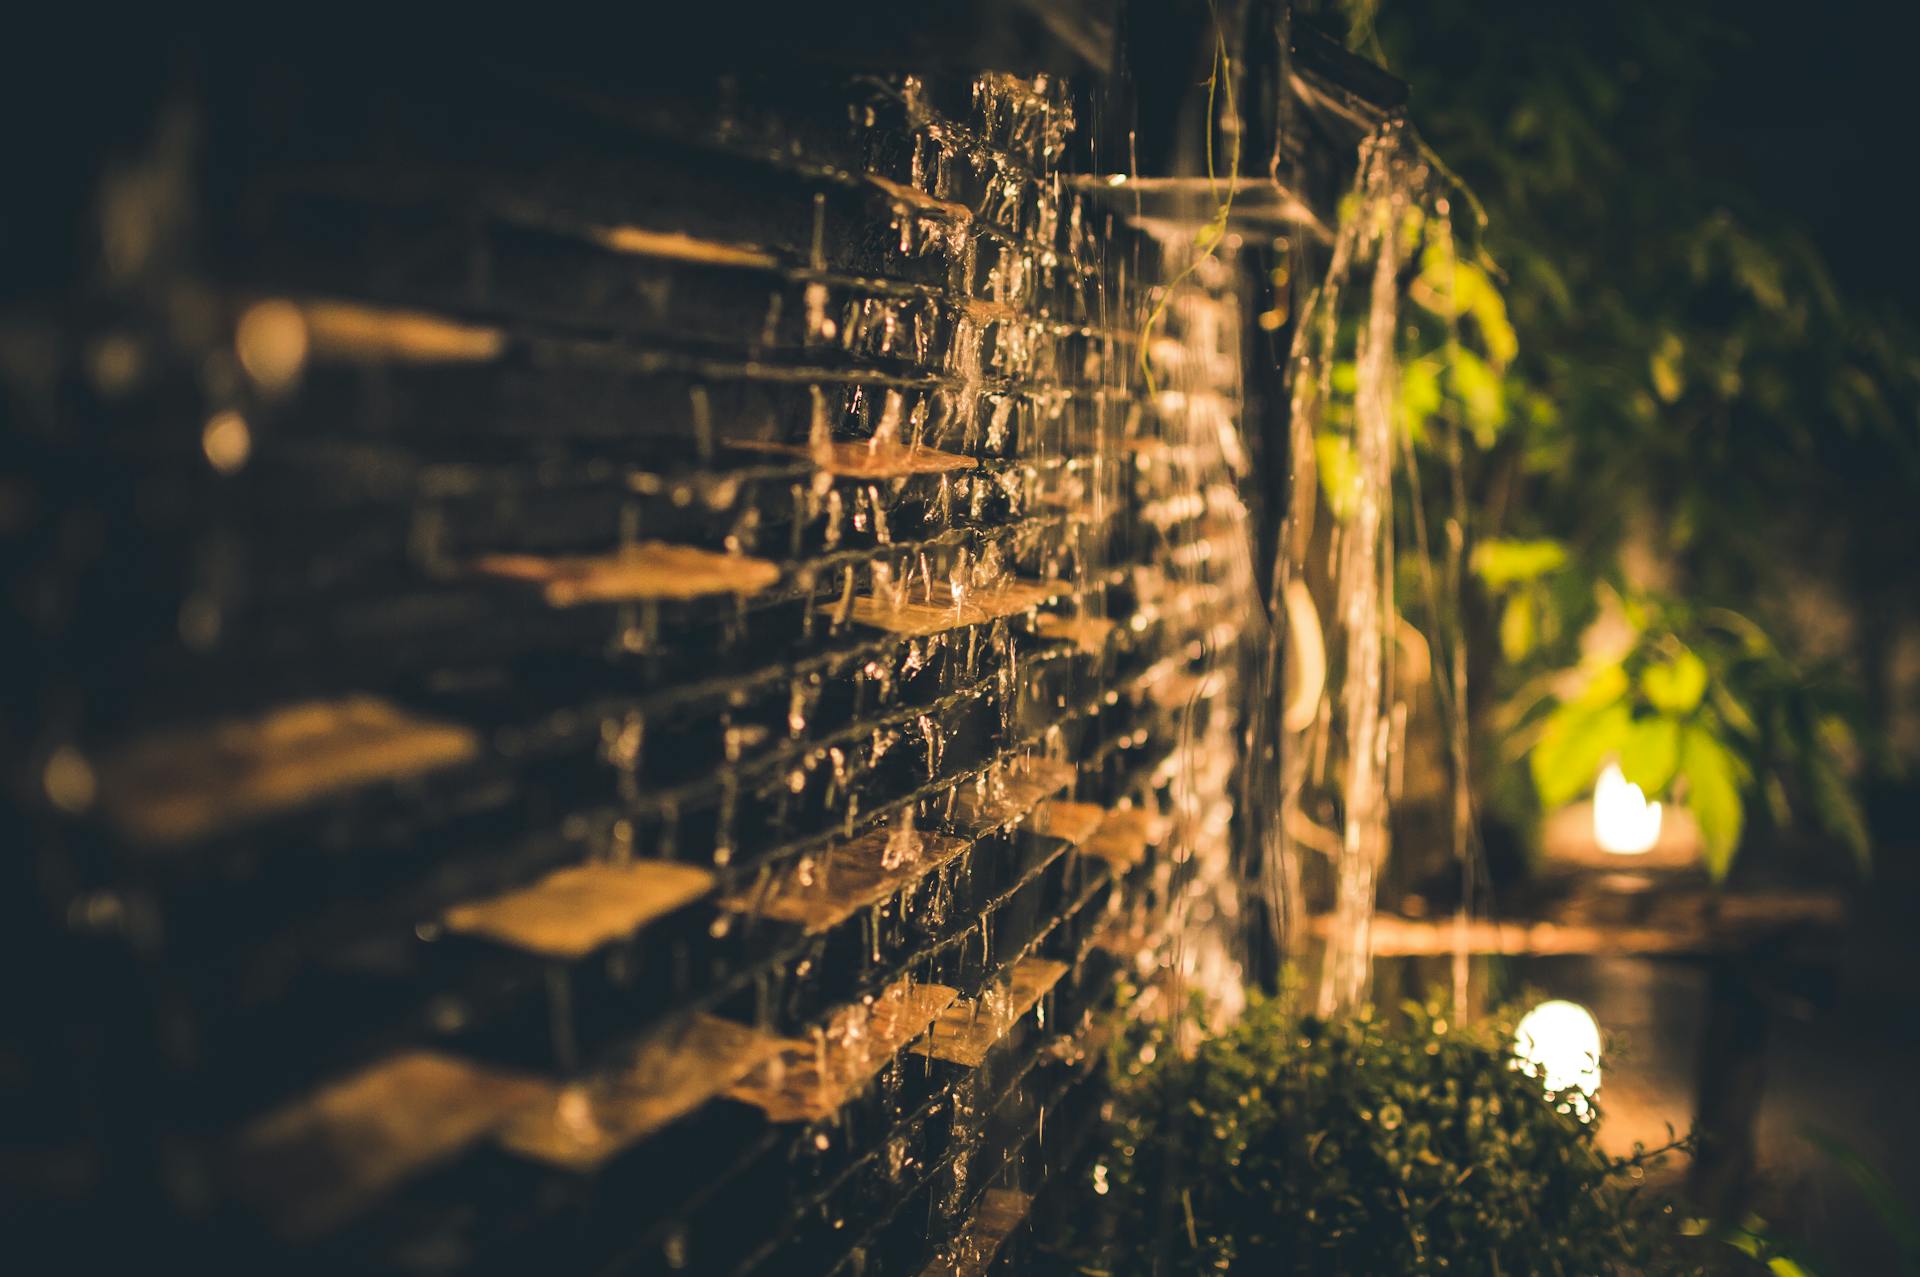 An outdoor water feature at night | Source: Pexels